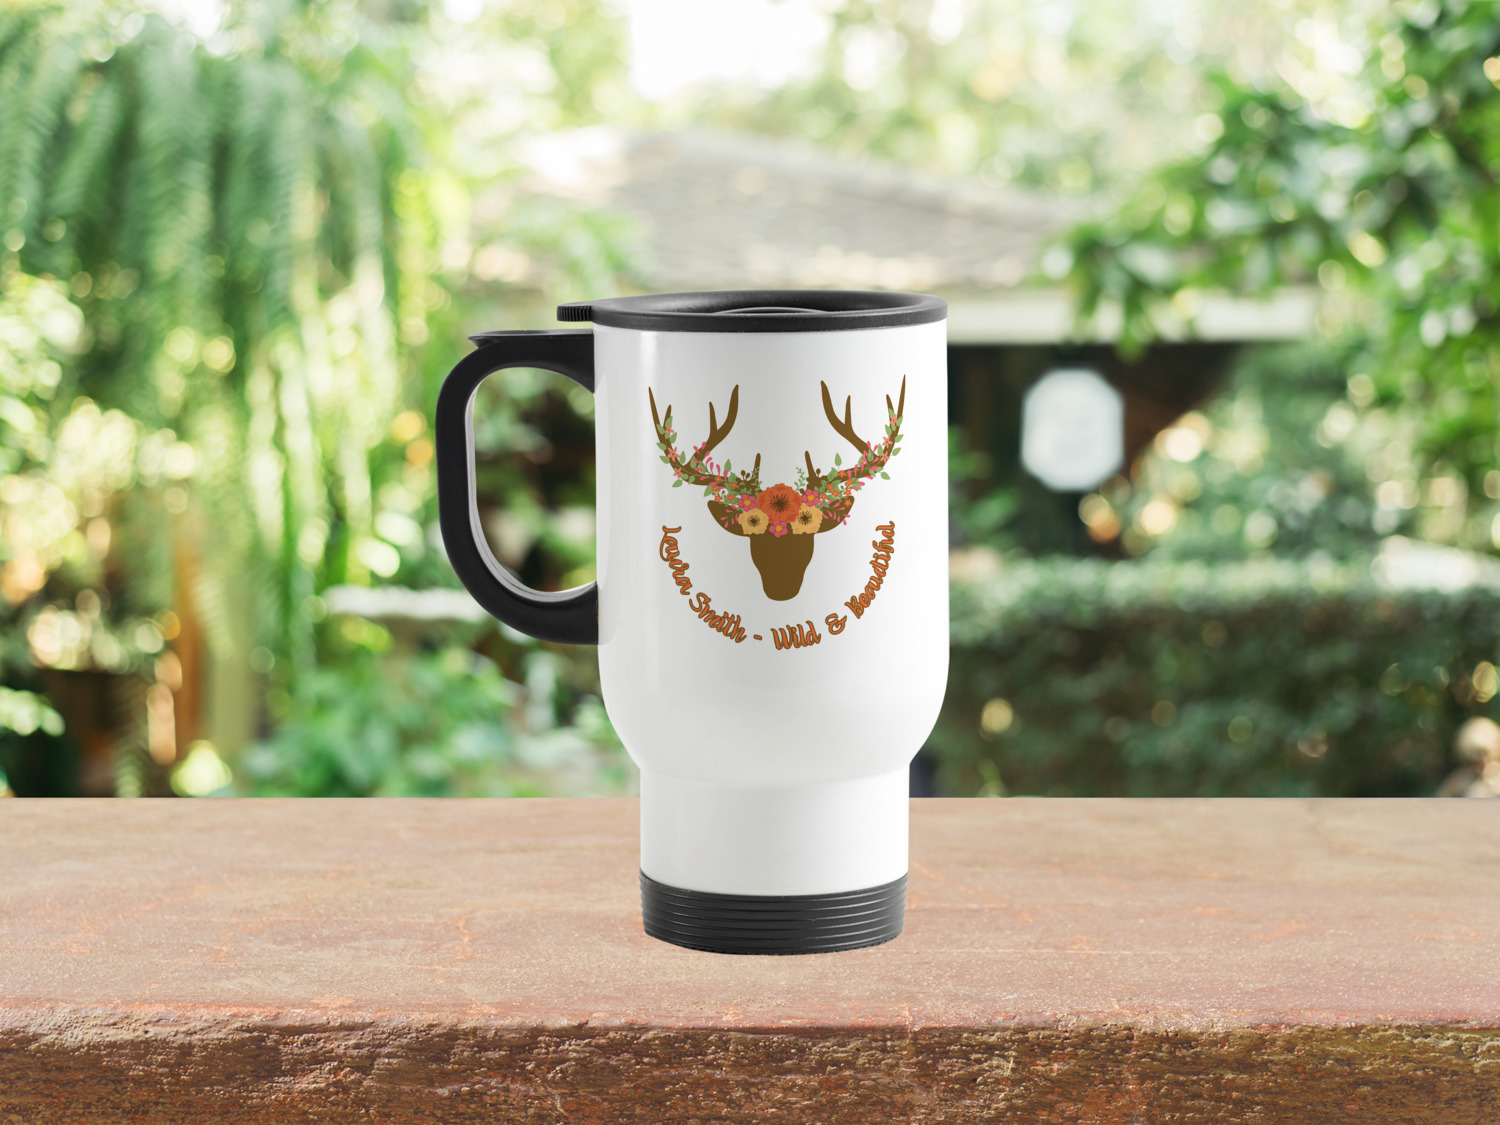 https://www.youcustomizeit.com/common/MAKE/1742200/Floral-Antler-Stainless-Steel-Travel-Mug-with-Handle-Lifestyle.jpg?lm=1666195539